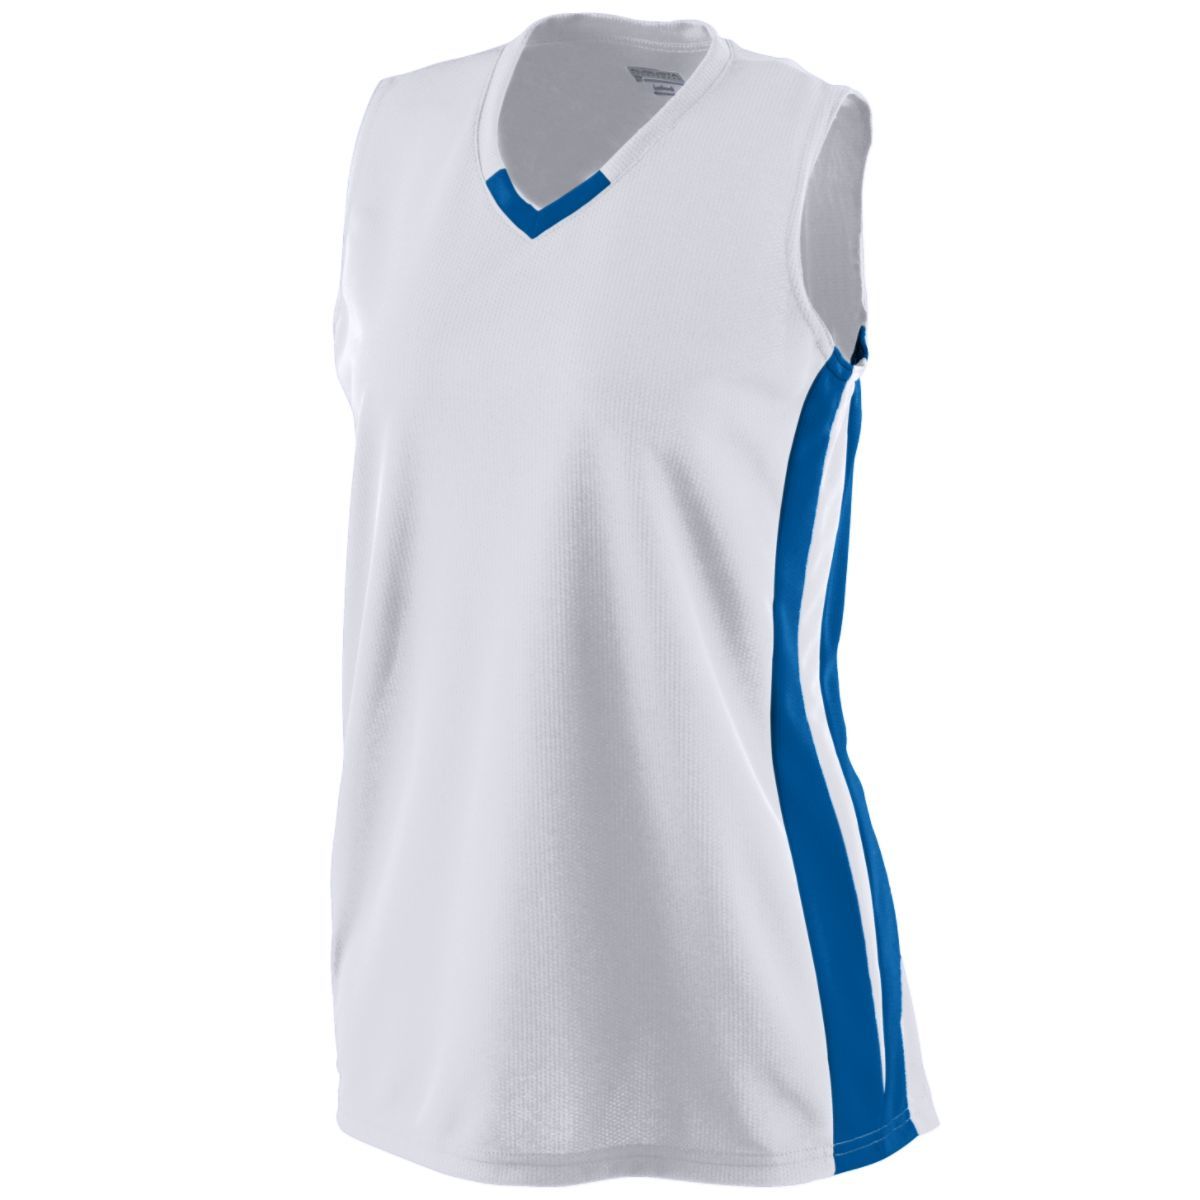 Augusta Sportswear Ladies Wicking Mesh Powerhouse Jersey in White/Royal  -Part of the Ladies, Ladies-Jersey, Augusta-Products, Softball, Shirts product lines at KanaleyCreations.com